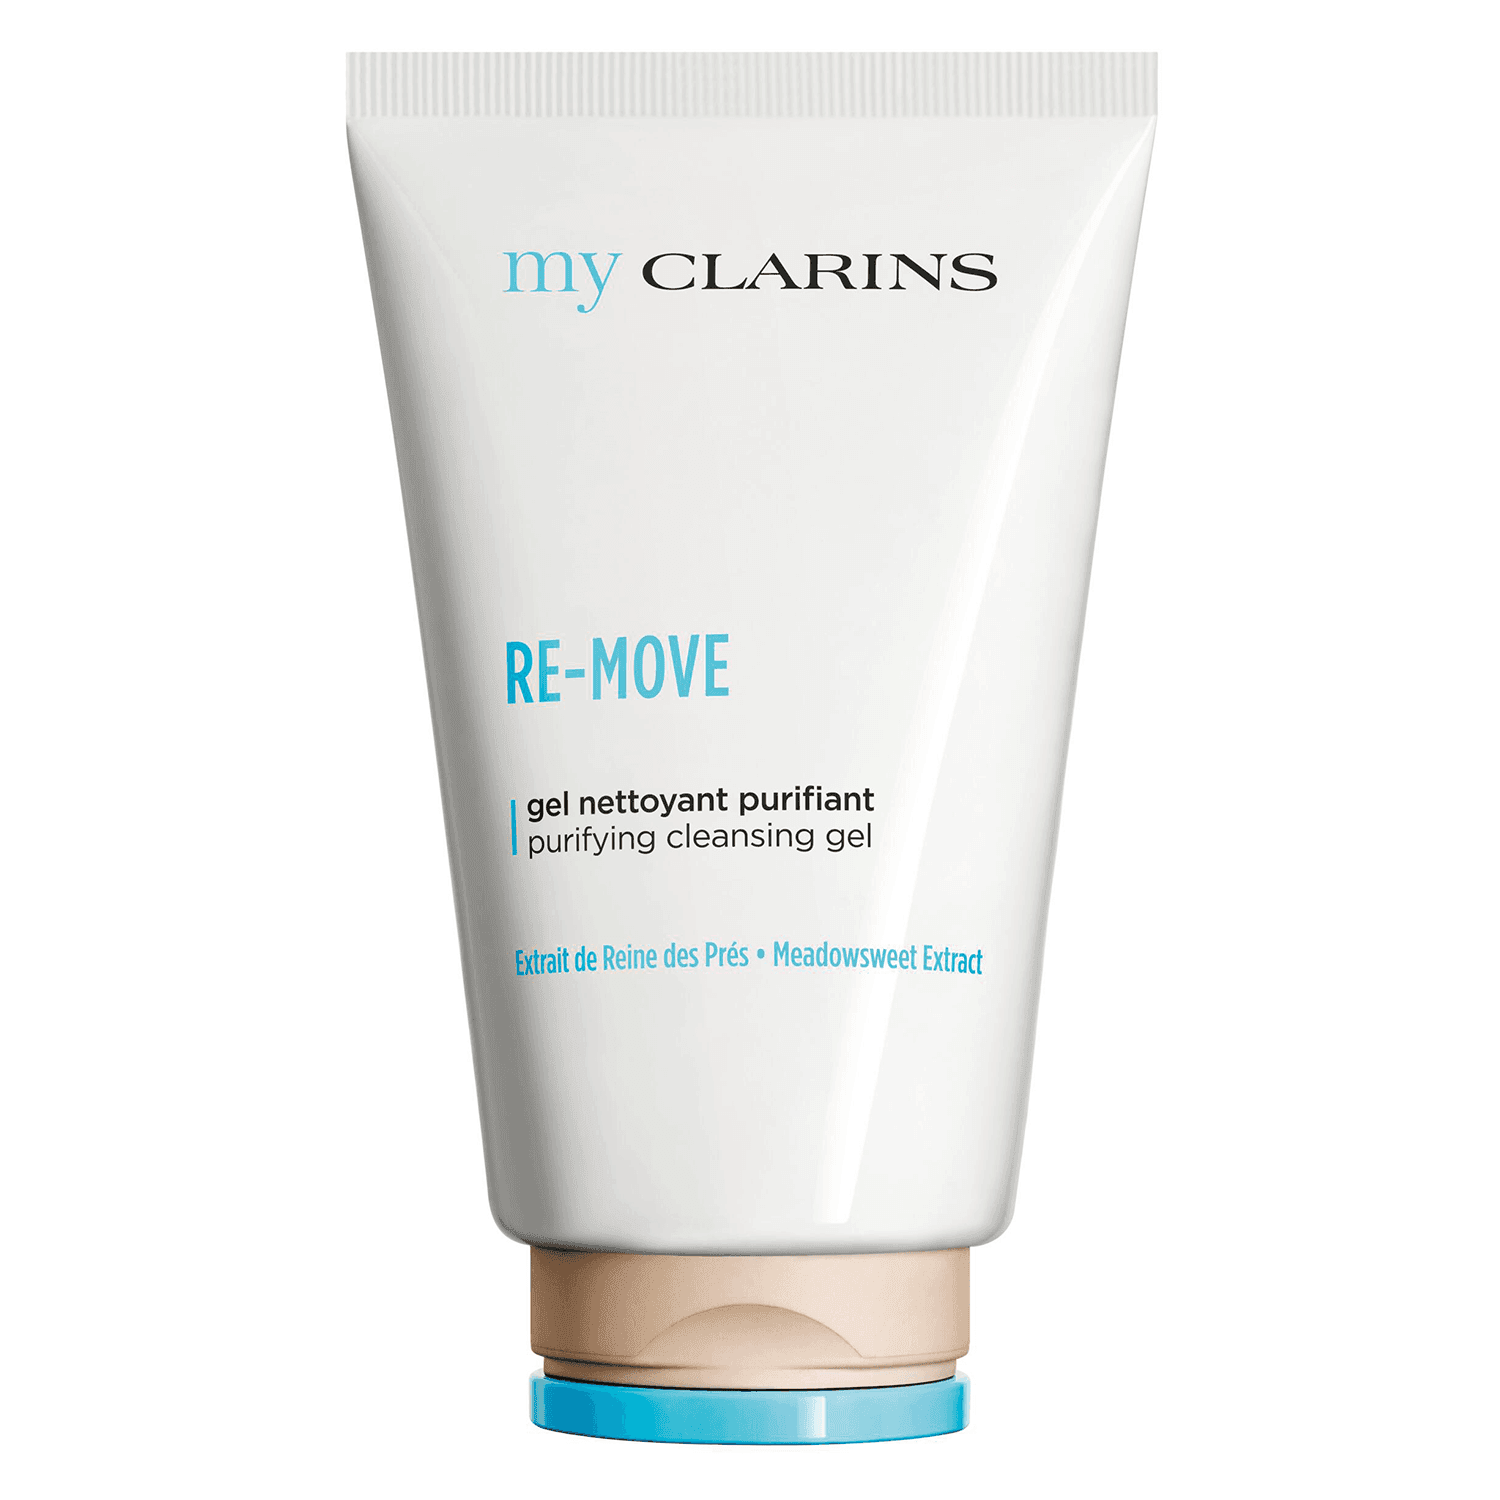 myClarins - RE-MOVE purifying cleansing gel